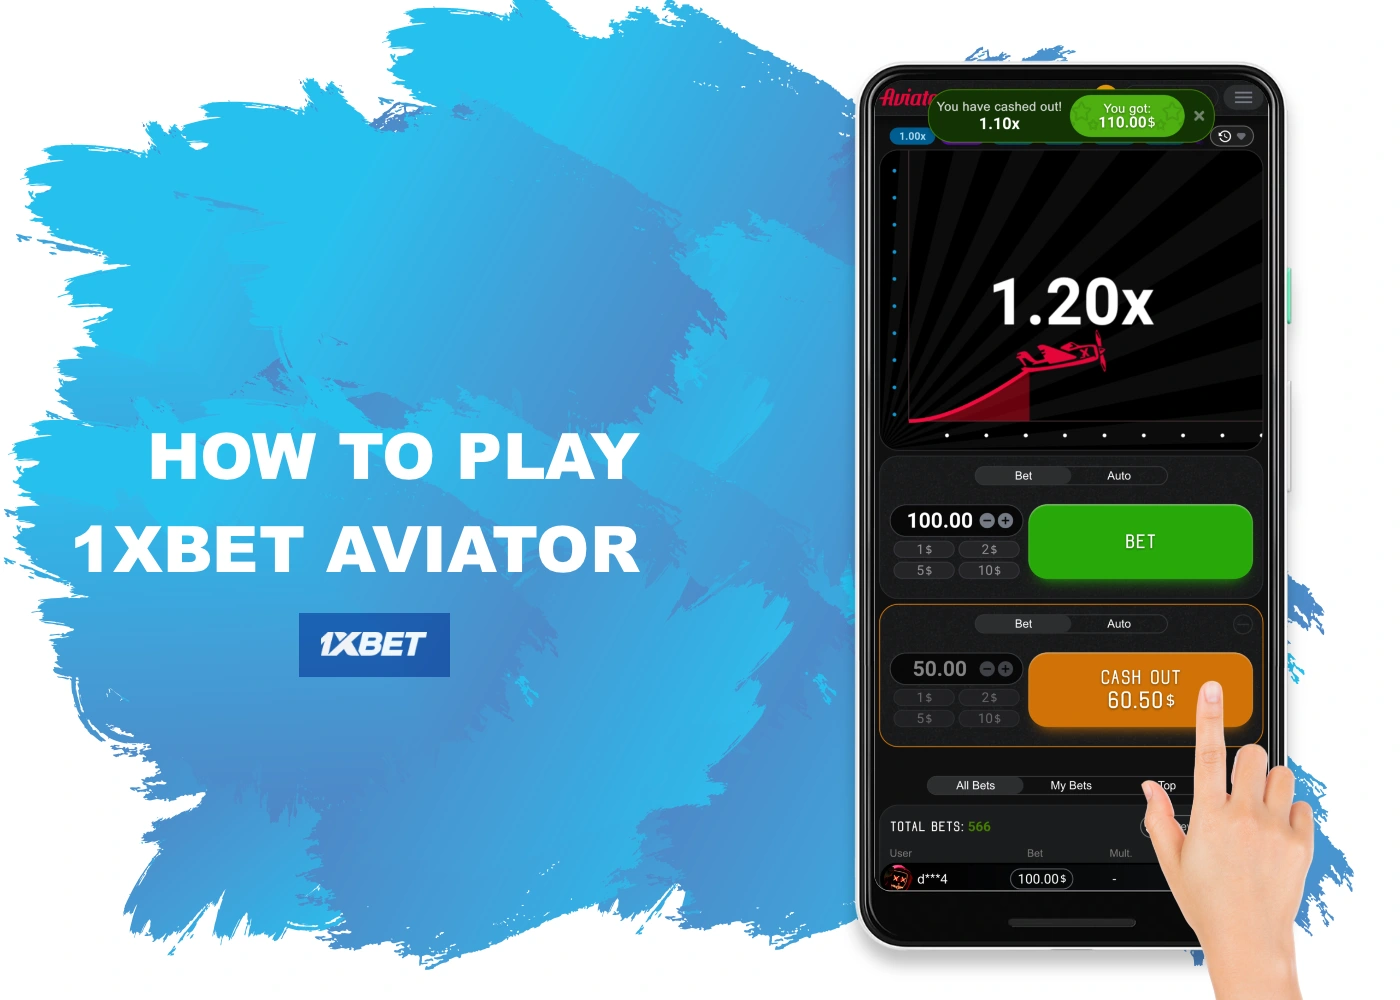 You can start playing in 1xBet Aviator just a minute after registration